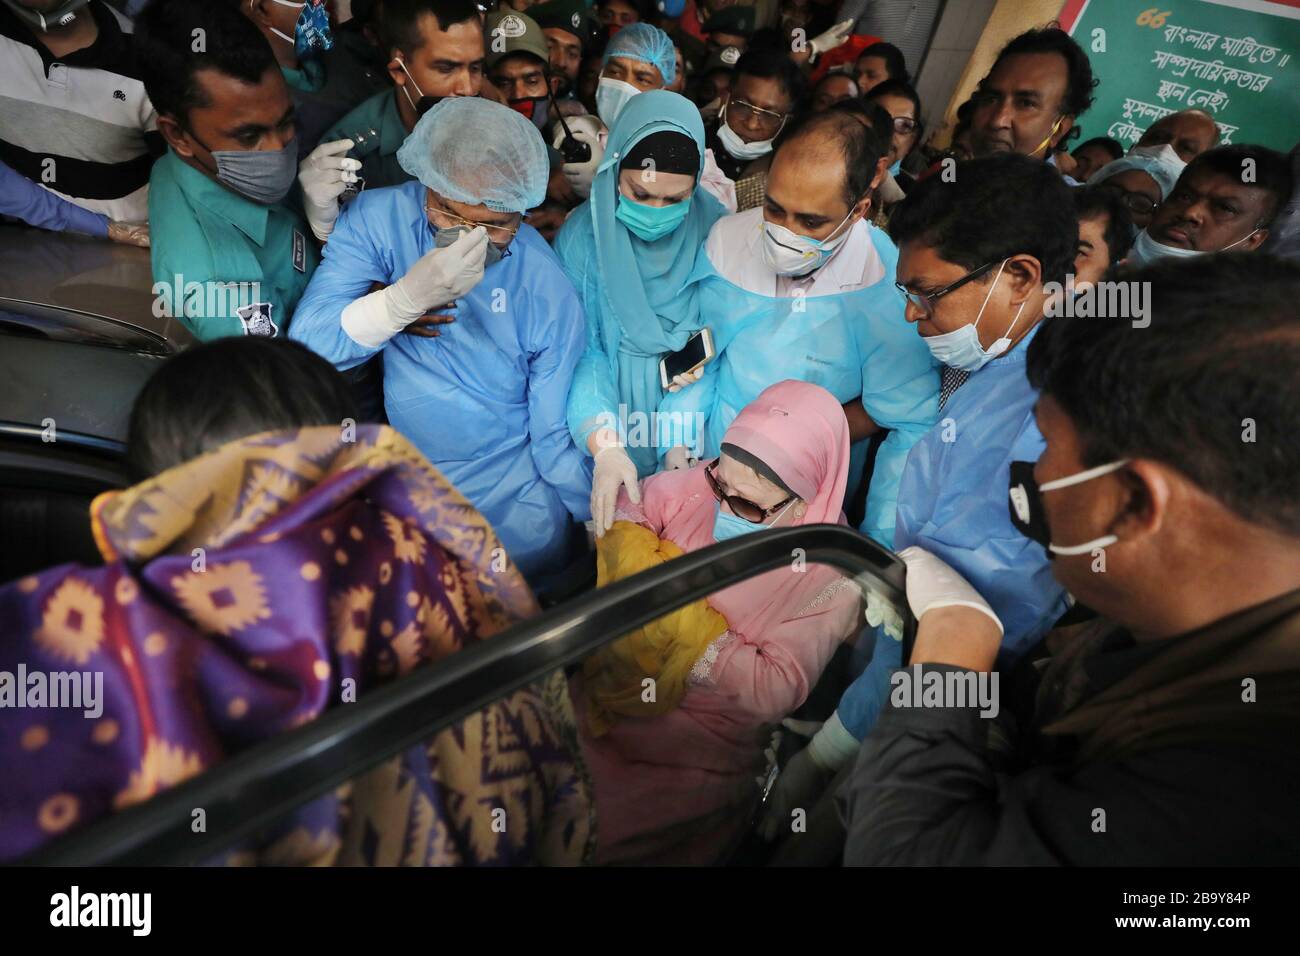 (200325) -- DHAKA, March 25, 2020 (Xinhua) -- Bangladeshi ex-Prime Minister Khaleda Zia in pink clothes leaves the Bangabandhu Sheikh Mujib Medical University (BSMMU) in Dhaka, Bangladesh, March 25, 2020. Khaleda Zia has been released from jail for six months on humanitarian grounds in light of the COVID-19 outbreak in the country.    Zia, also chairperson of Bangladesh Nationalist Party (BNP), at around 4:15 p.m. local time on Wednesday, came out of Bangabandhu Sheikh Mujib Medical University (BSMMU) in capital Dhaka, where she was being treated.     In April 2018, Zia was shifted to the BSMM Stock Photo